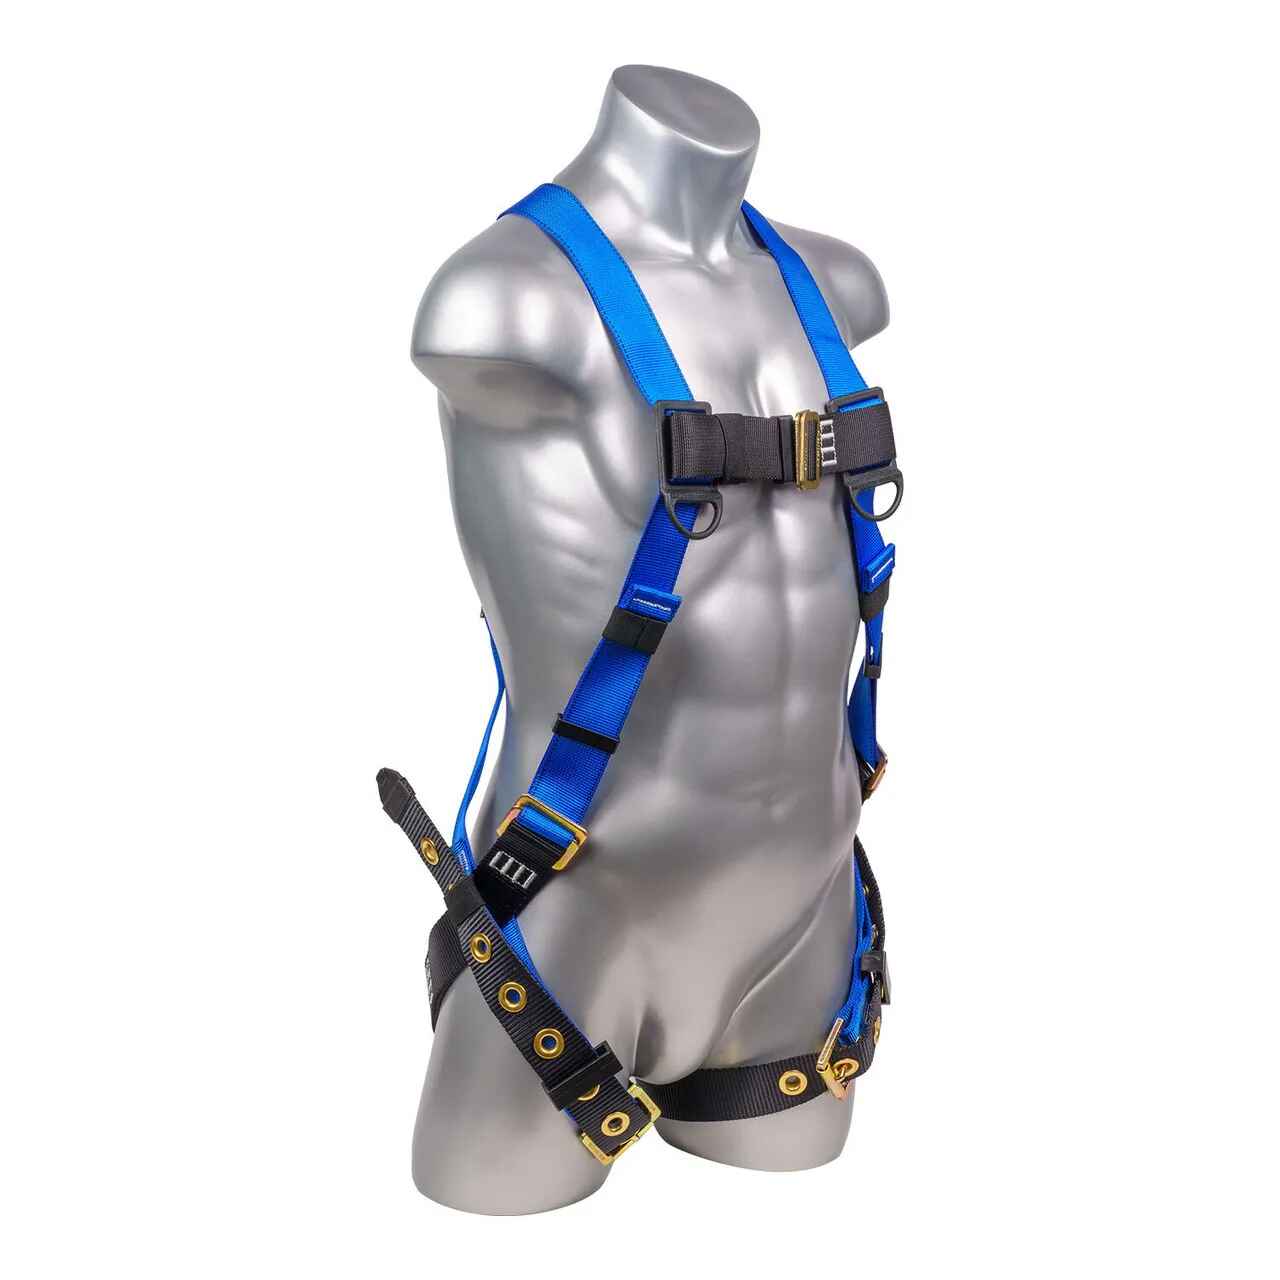 Construction Safety Harness 5 Point, Grommet Legs, Back D-Ring, Blue SM